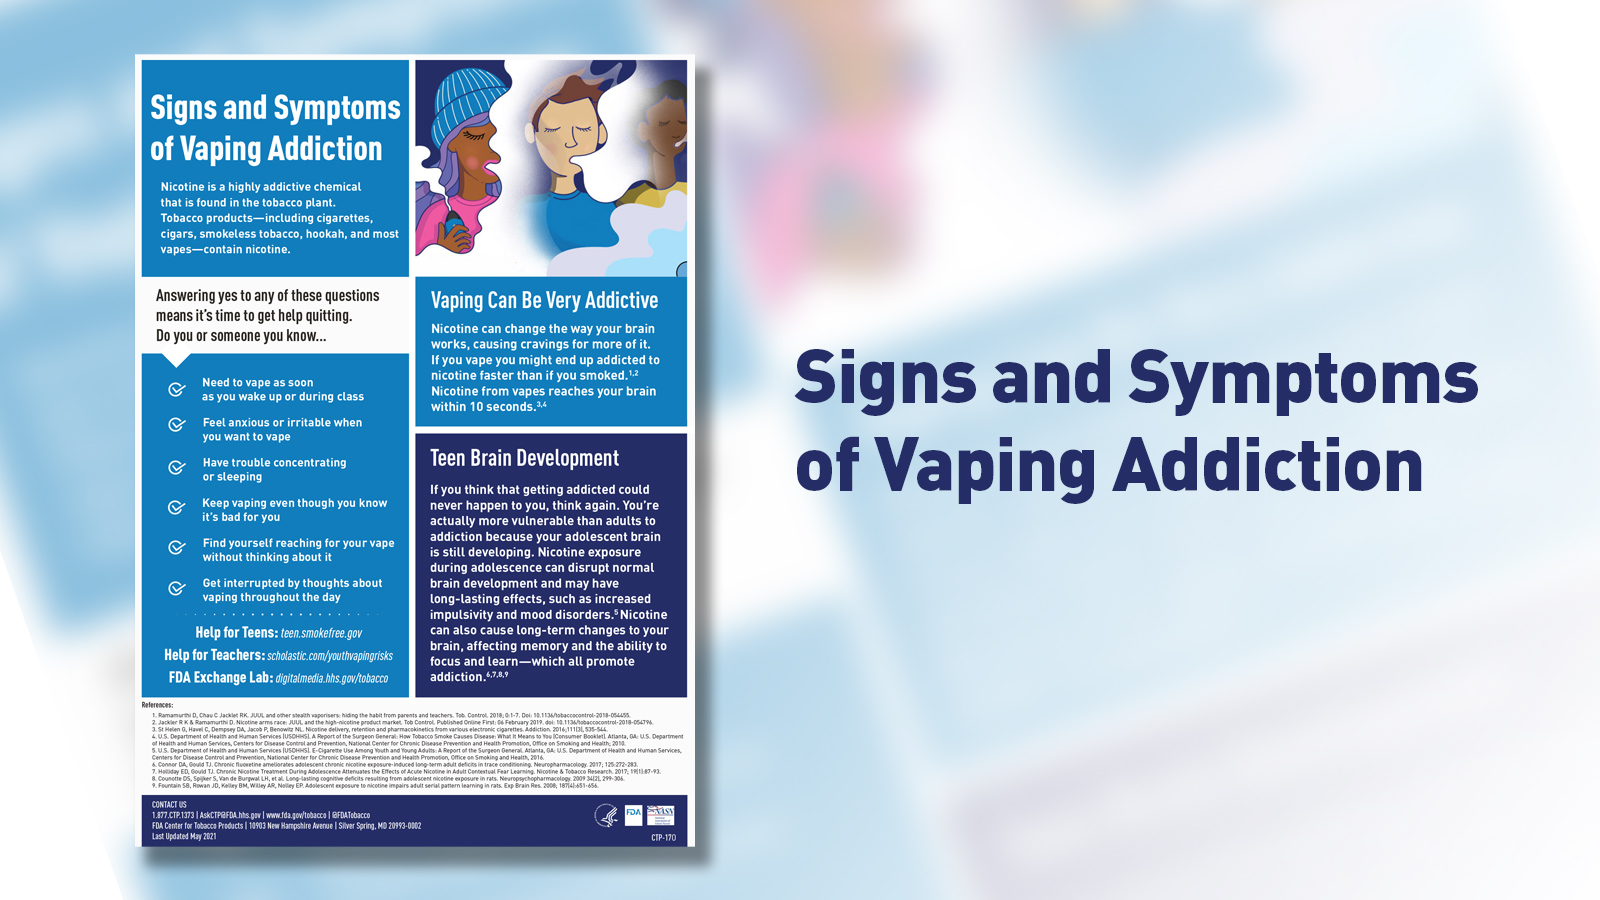 Signs and Symptoms of Vaping Addiction